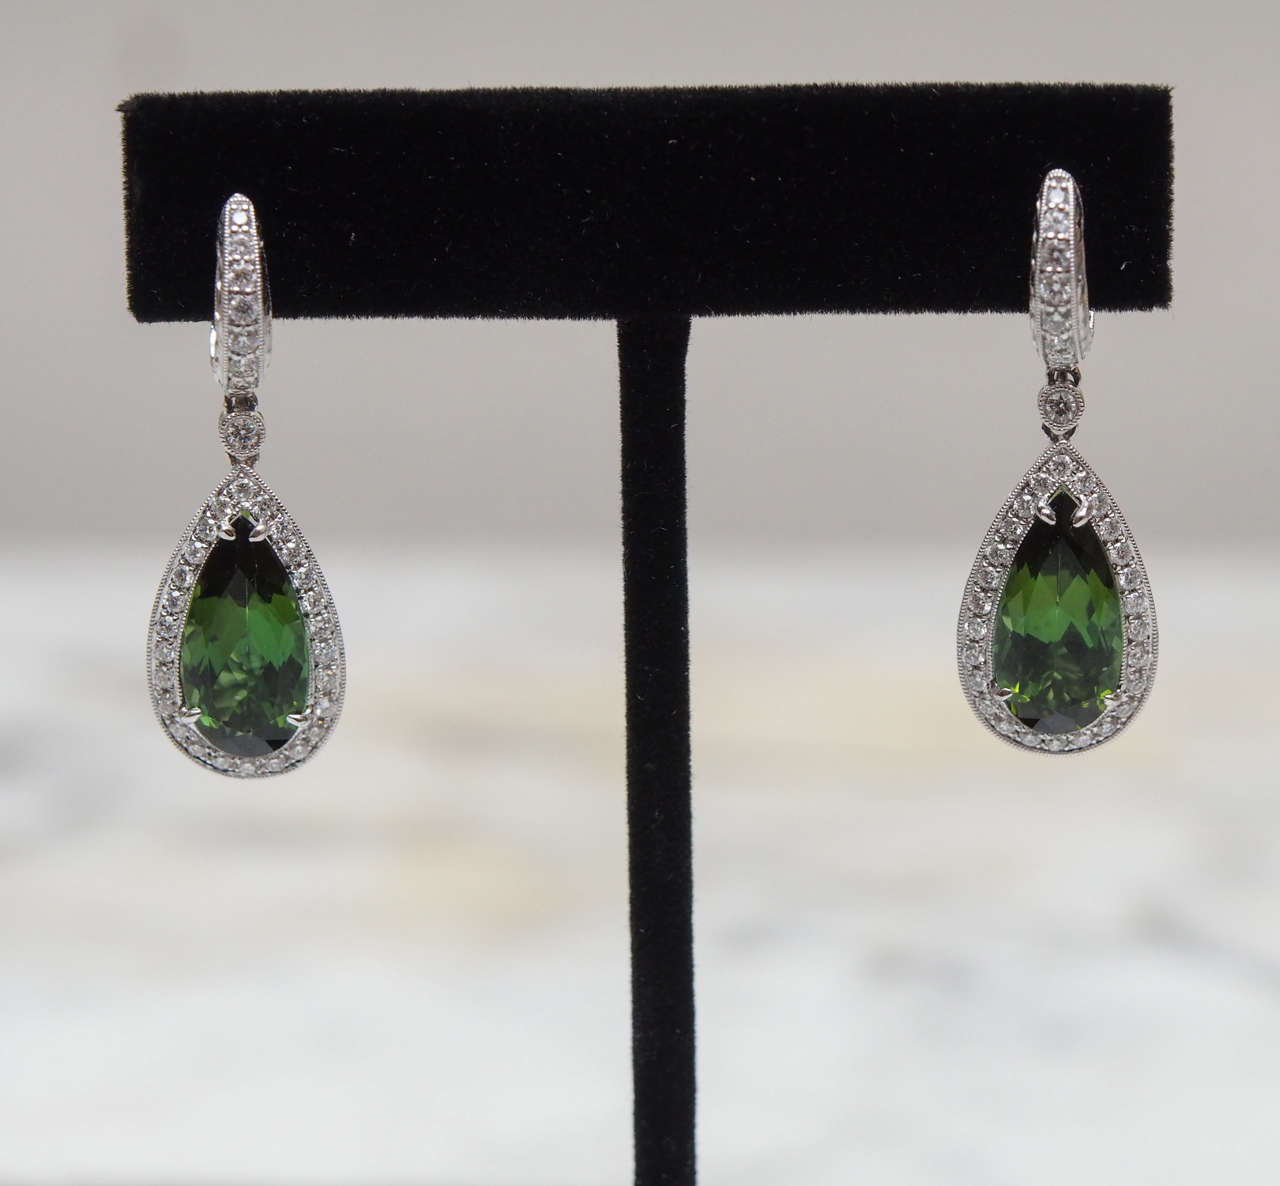 One pair of Chrome Tourmaline and diamond earrings.  The tourmalines weigh approximately 3.85cts each.  There are 34 diamonds, having F-G color and VS clarity, in each earring weighing approximately 1.02cts. Total weight for the tourmalines is